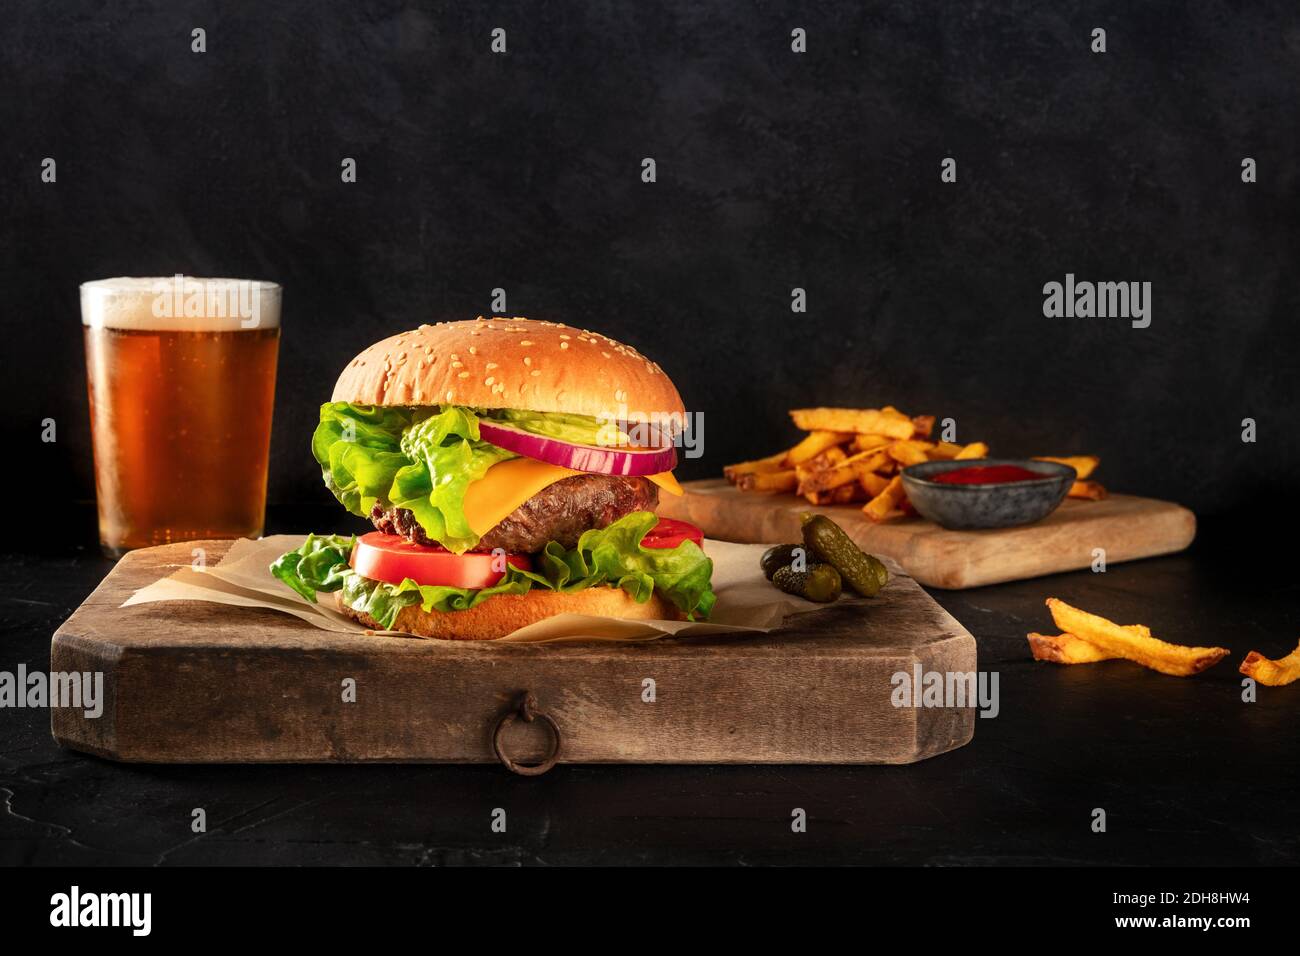 Burger and beer. Hamburger with beef, cheese, onion, tomato, and green salad, with pickles and French fries, a side view on a bl Stock Photo